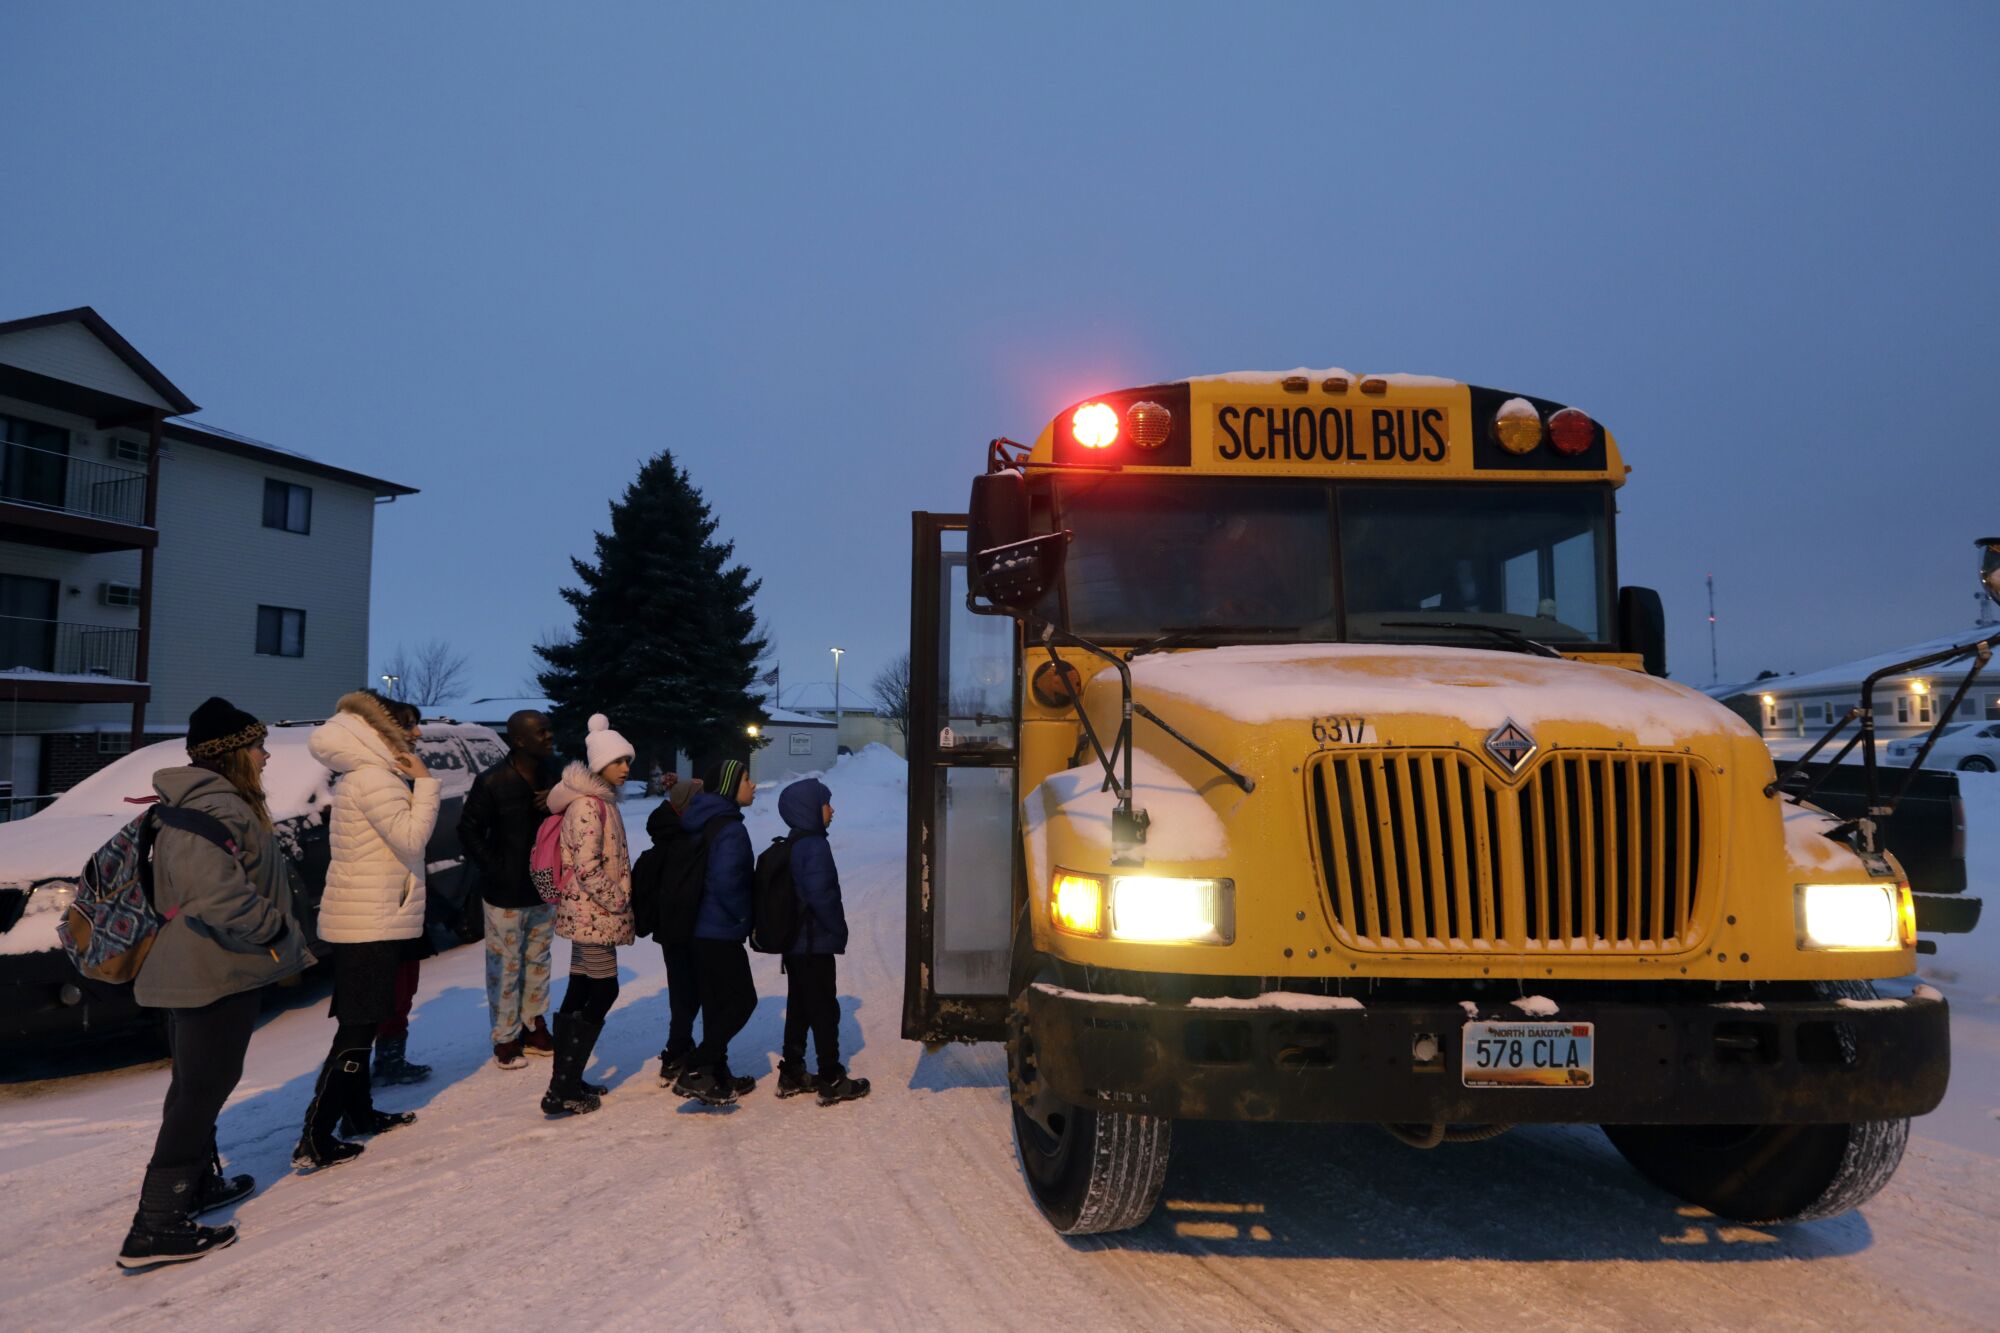 Yuliia Kulybchuk, age 33, second from left, is mother of five children who with her husband Anatolli Kulybchuk immigrated from Ukraine to North Dakota in 2019. They are religious minority. Yuliia sees four of her children onto the school bus in the morning. Everyone in the family must now learn to speak English.